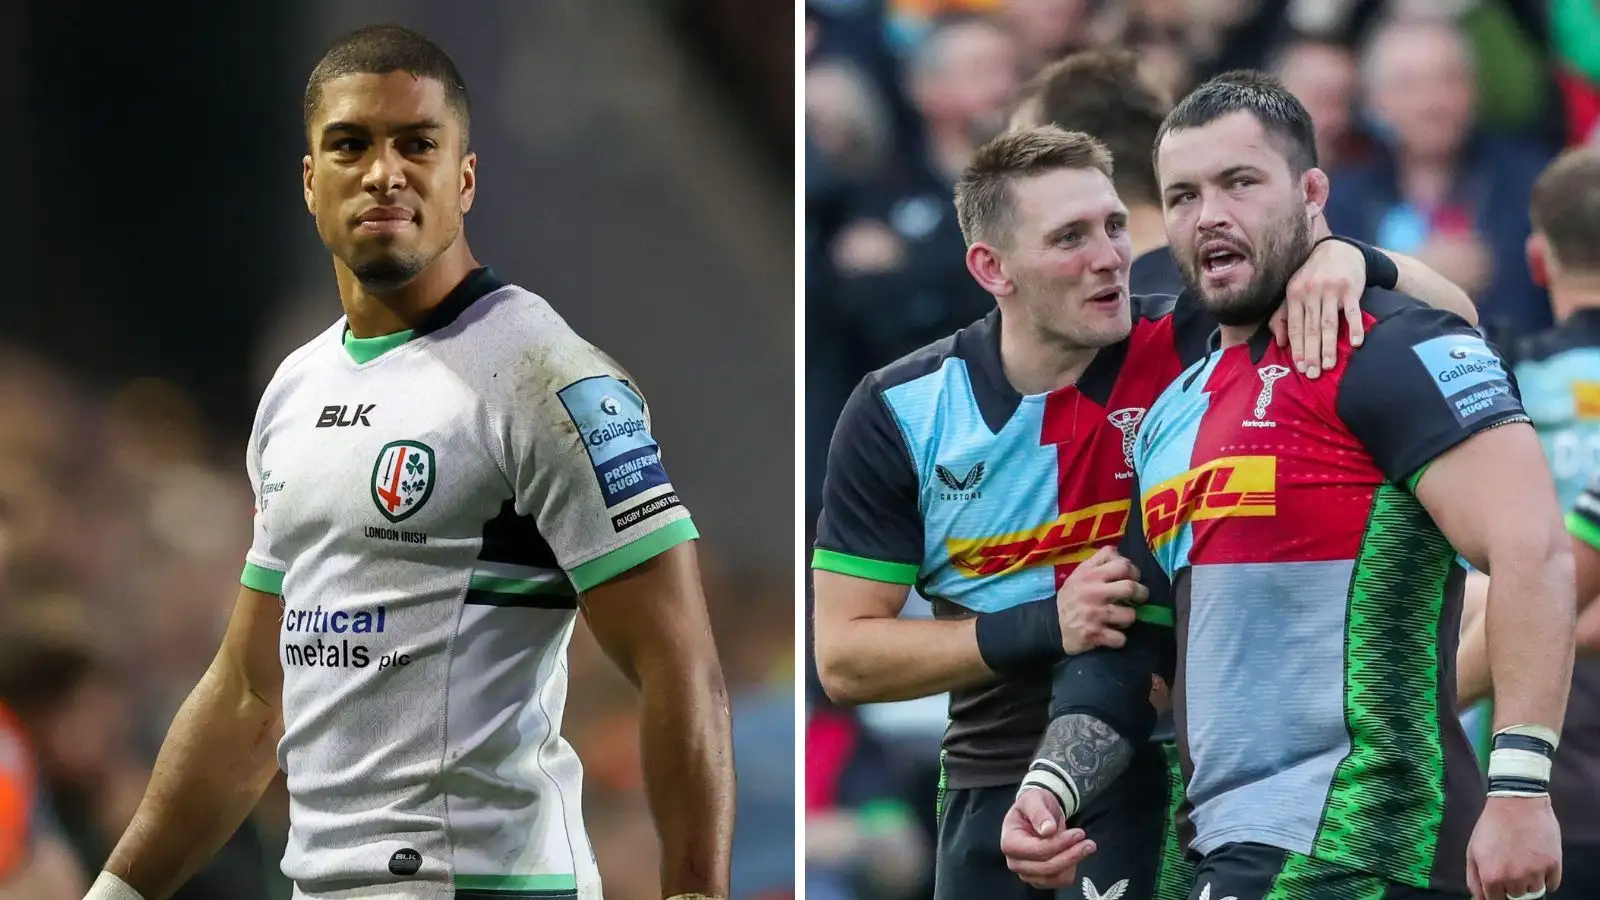 London Irish have announced that explosive winger Ben Loader has signed a contract extension with the club; meanwhile, prop Simon Kerrod has re-signed with Harlequins.